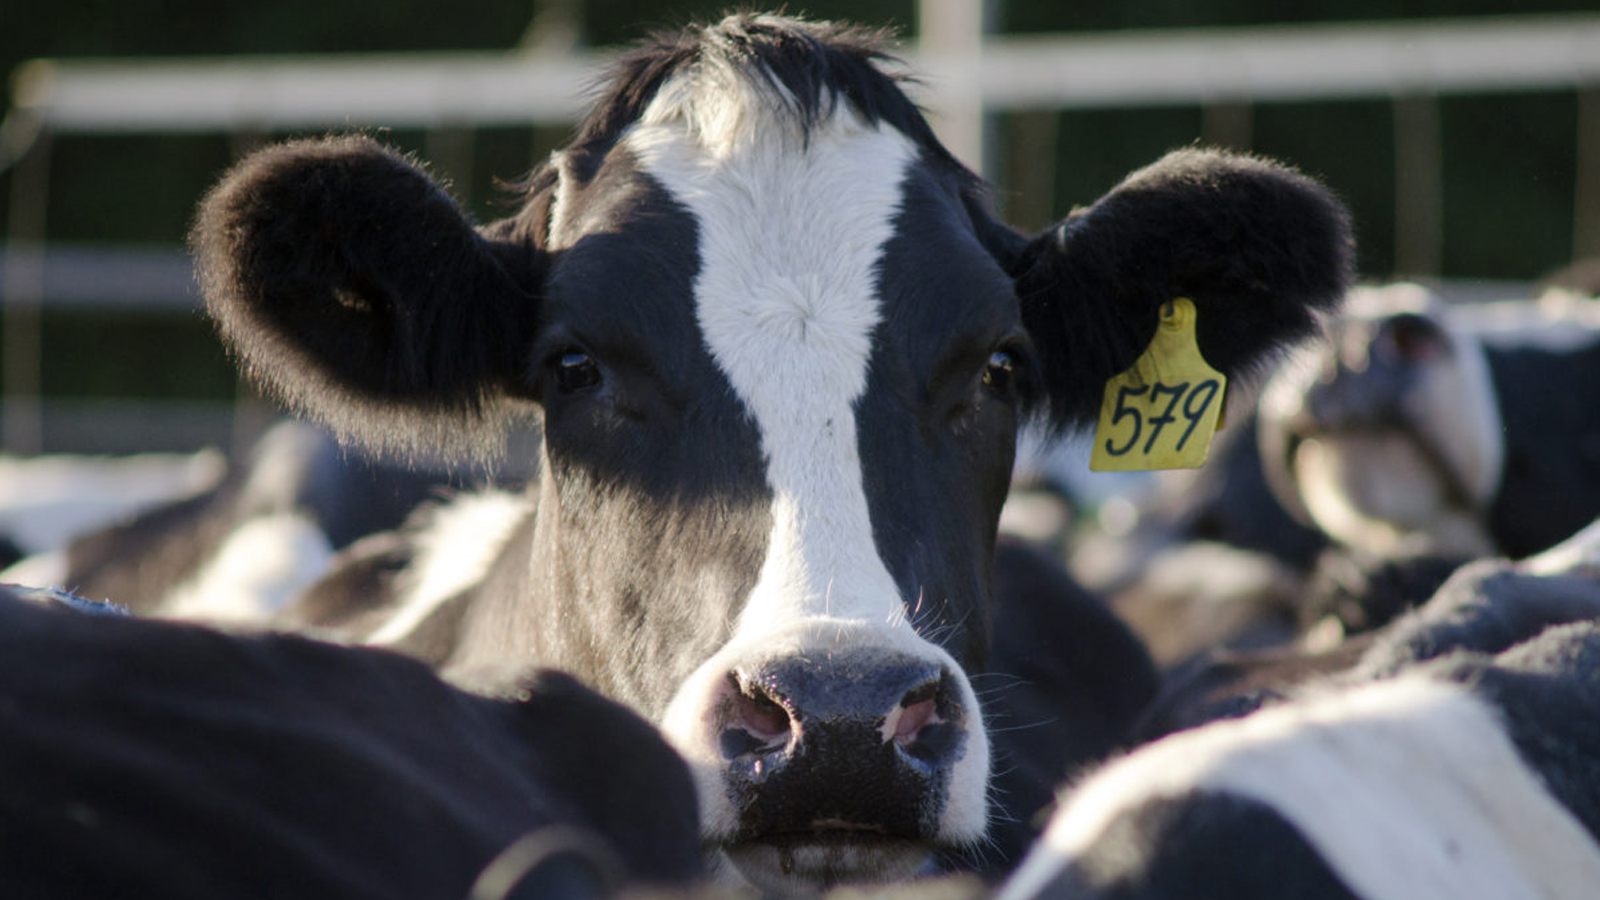 Innovation in Food Production: Cultivated Meat - Animal Legal Defense Fund